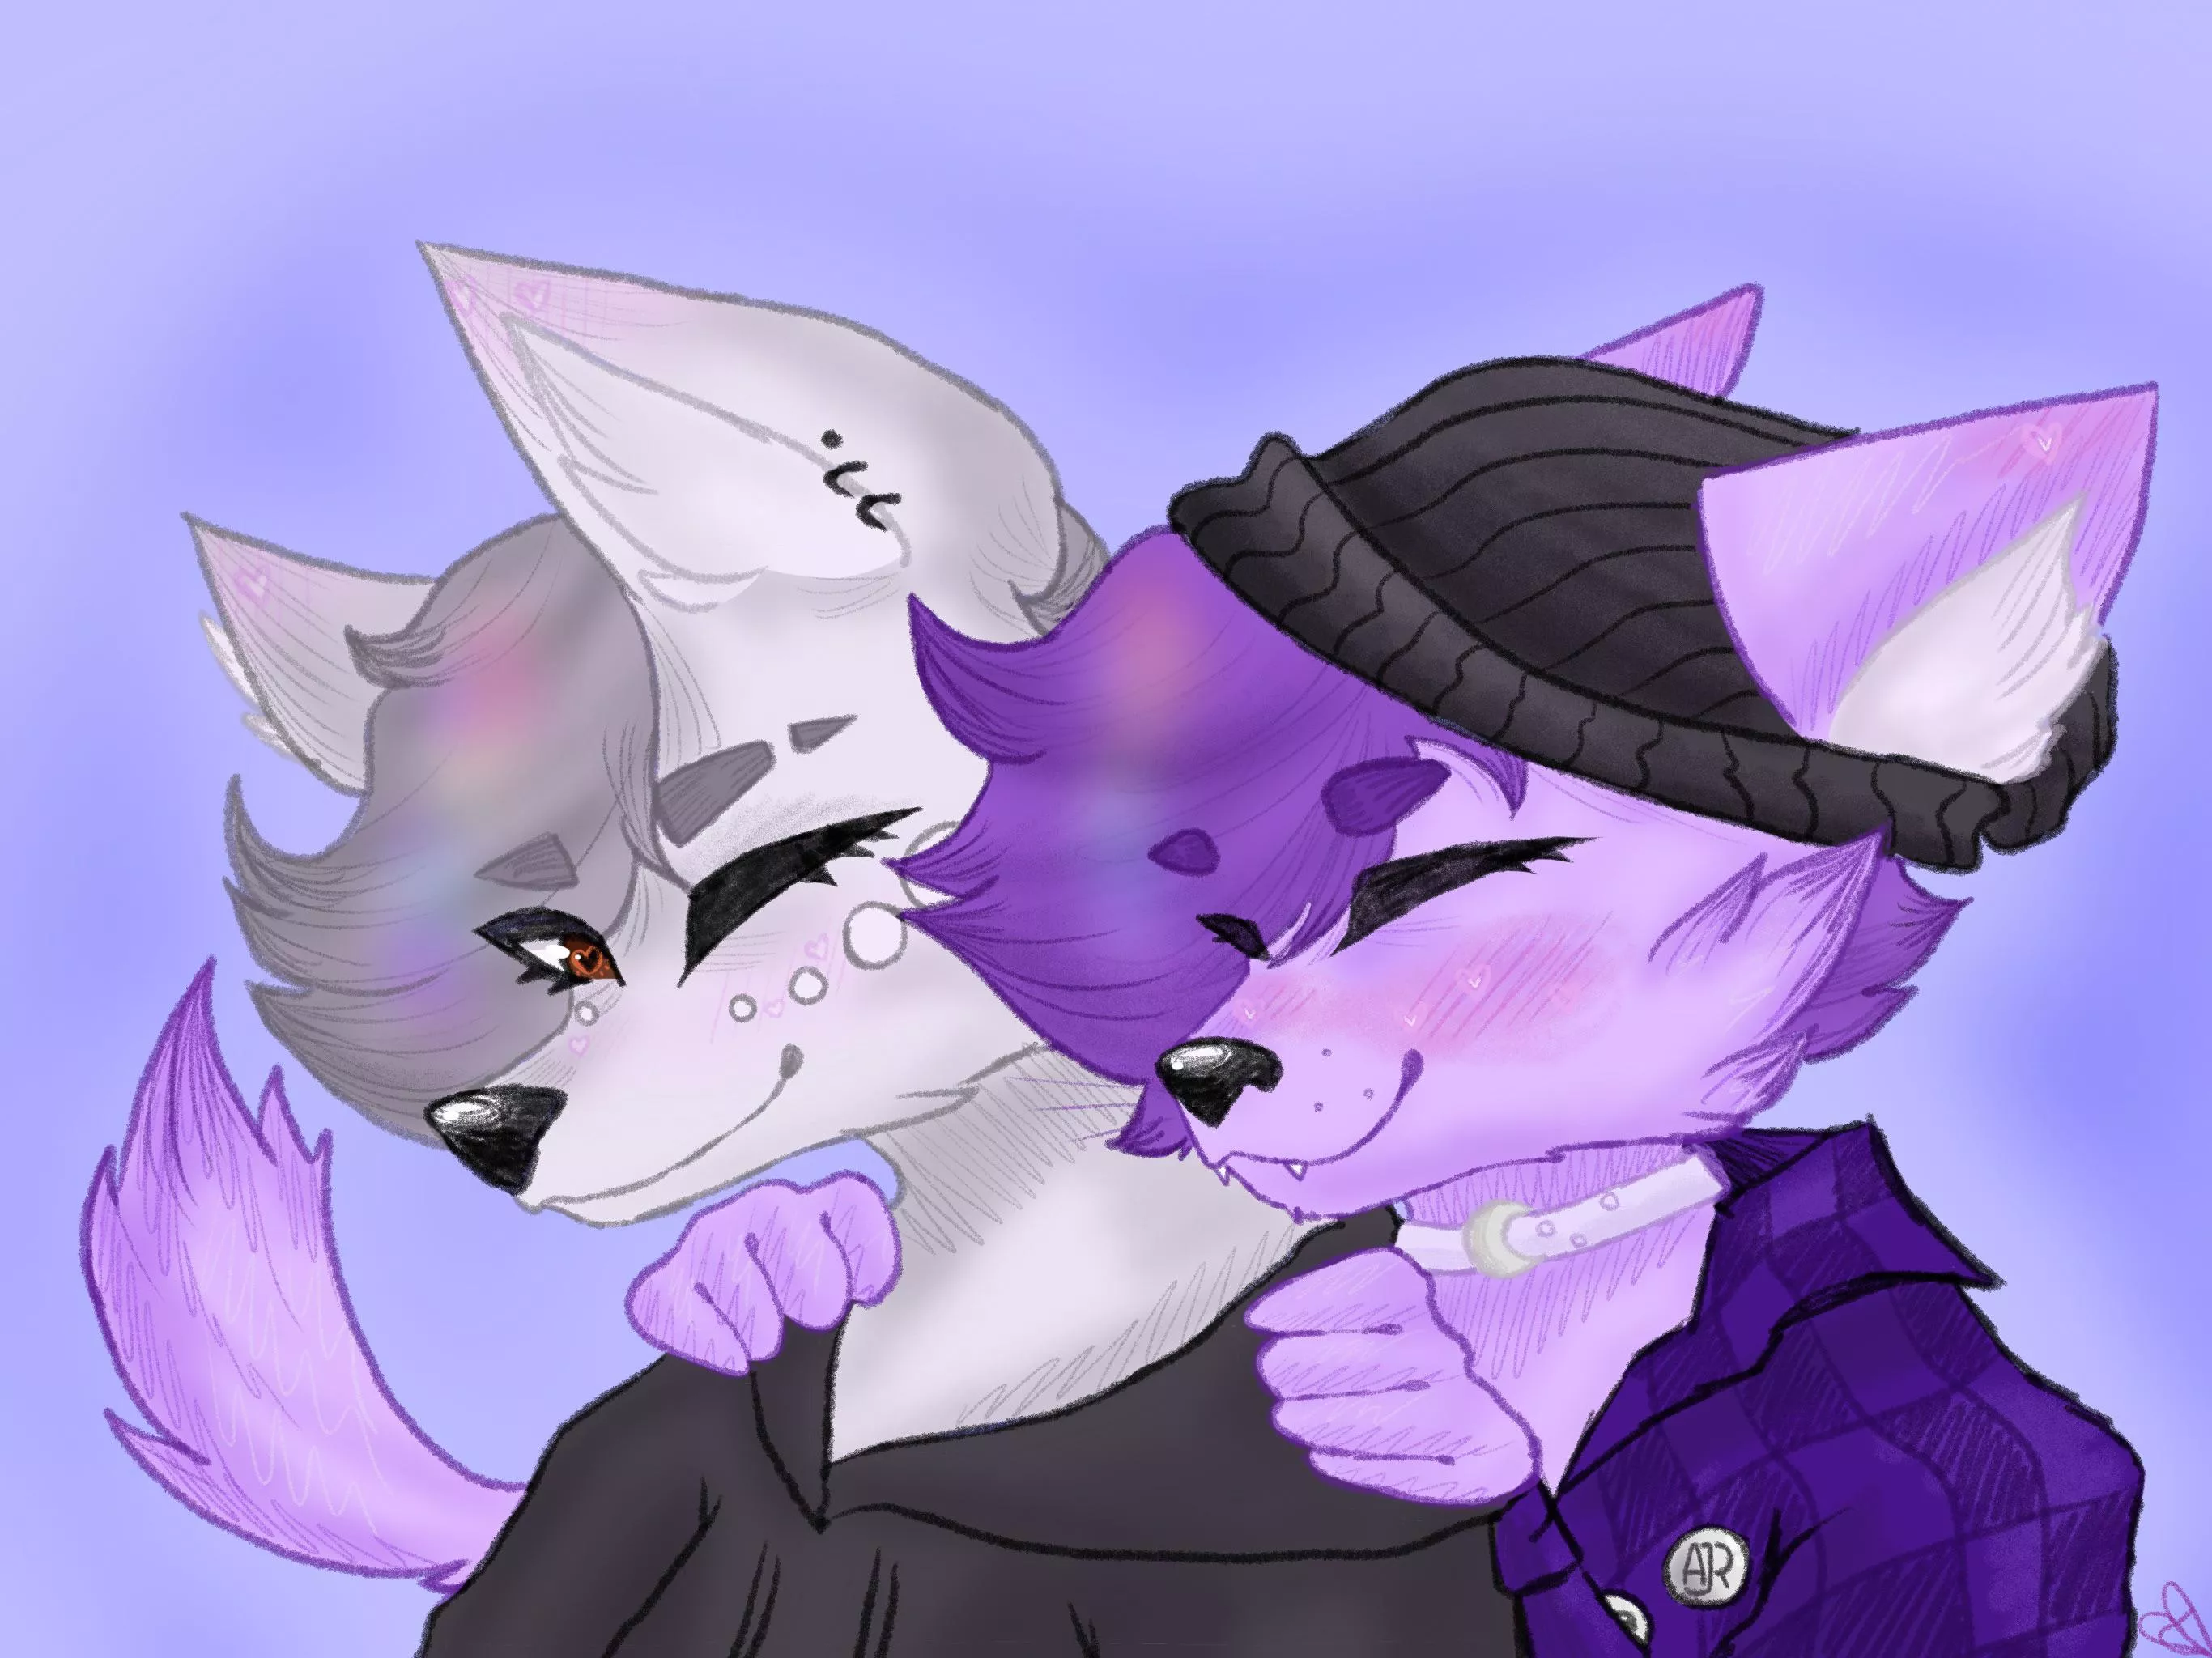 Matching Pfp Art For My Partner And Myself By Me Nudes By Icyhotfur